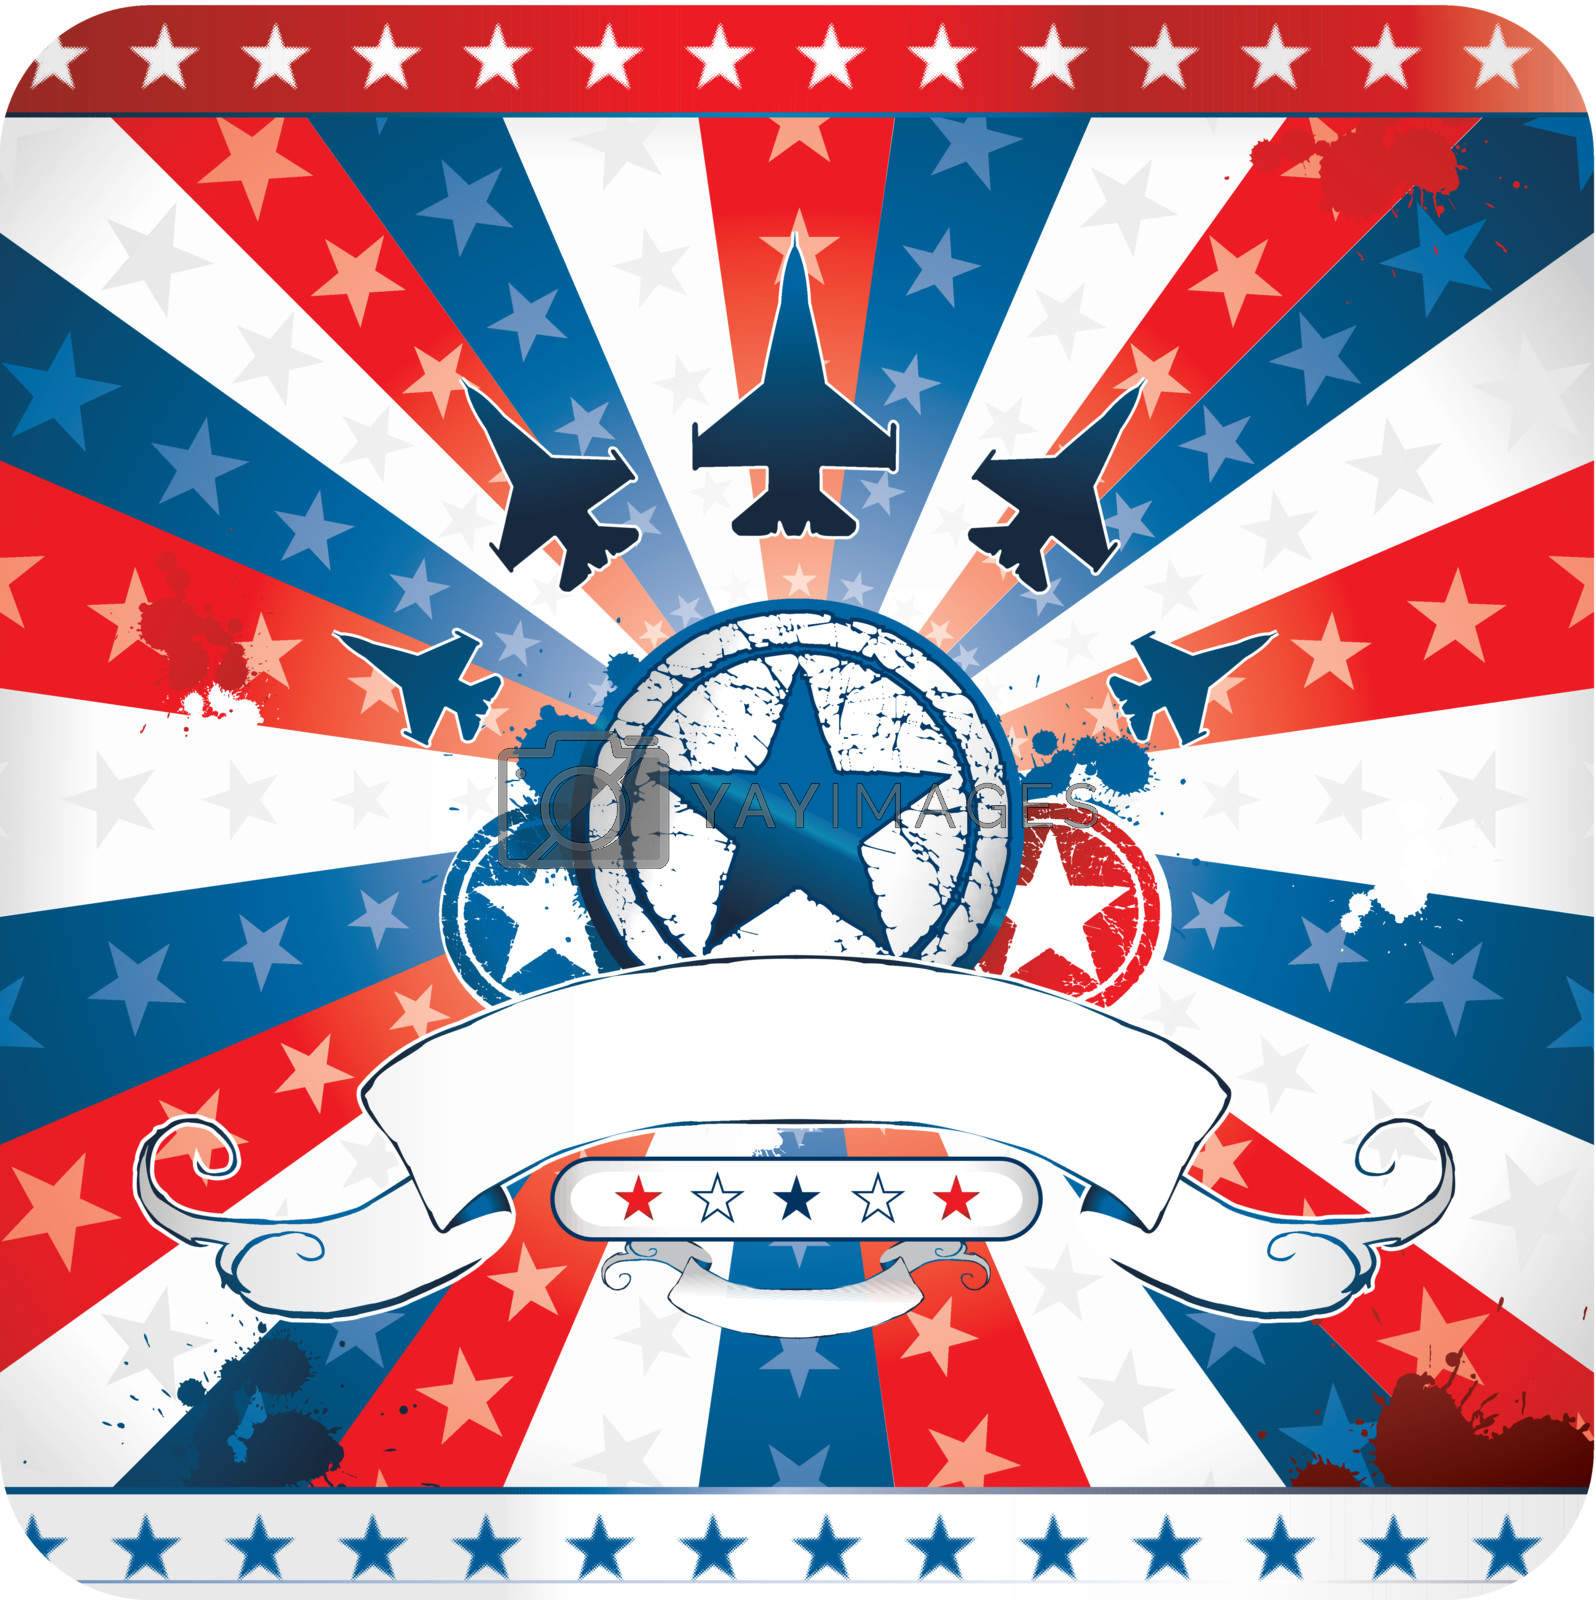 Royalty free image of Elements and icons related to American patriotism by hugolacasse